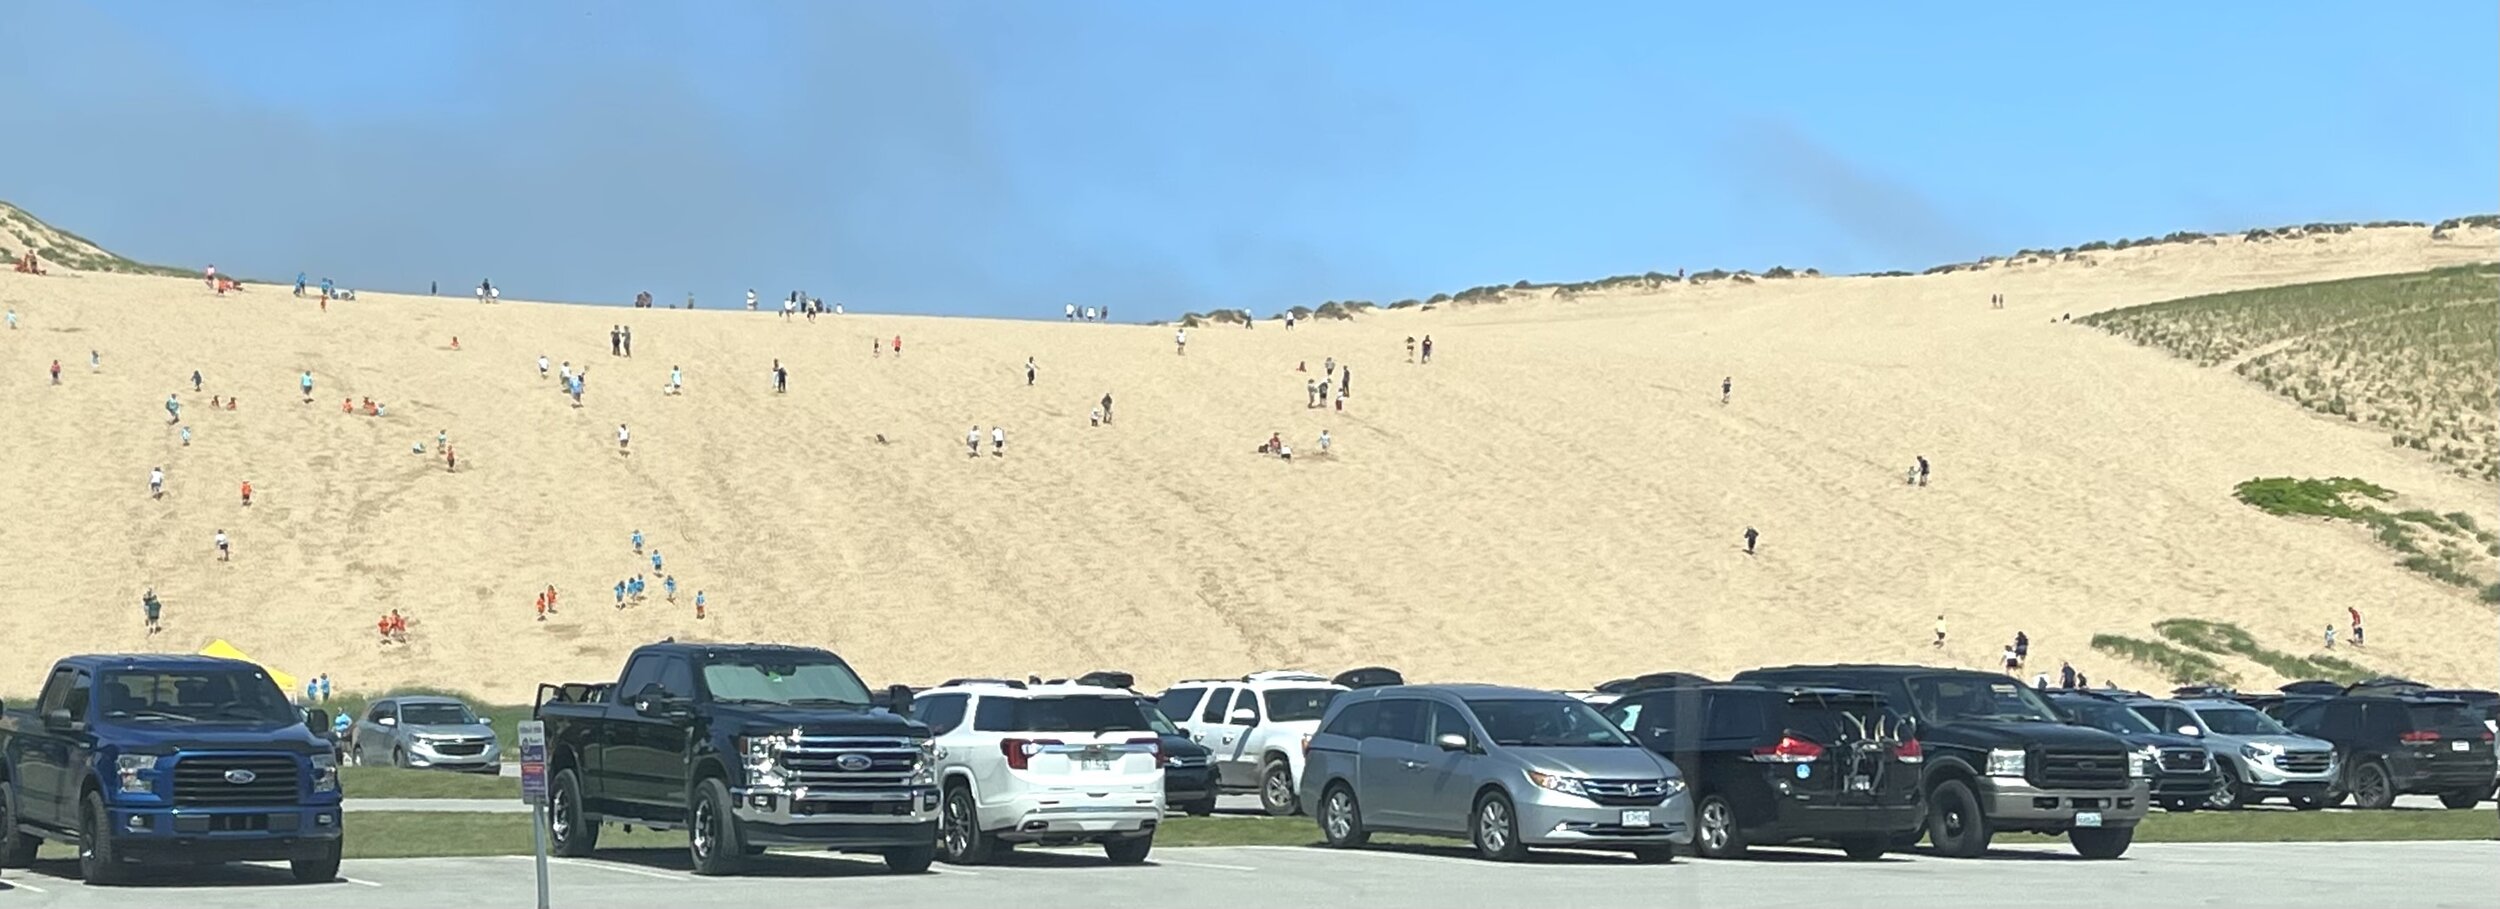  This 460-foot sand dune is a climbing favorite for park visitors. Many people climb this misleading dune expecting an overlook into Lake Michigan. The trail is actually a continuous climb up and down many more sand dunes for over 2 miles before reac